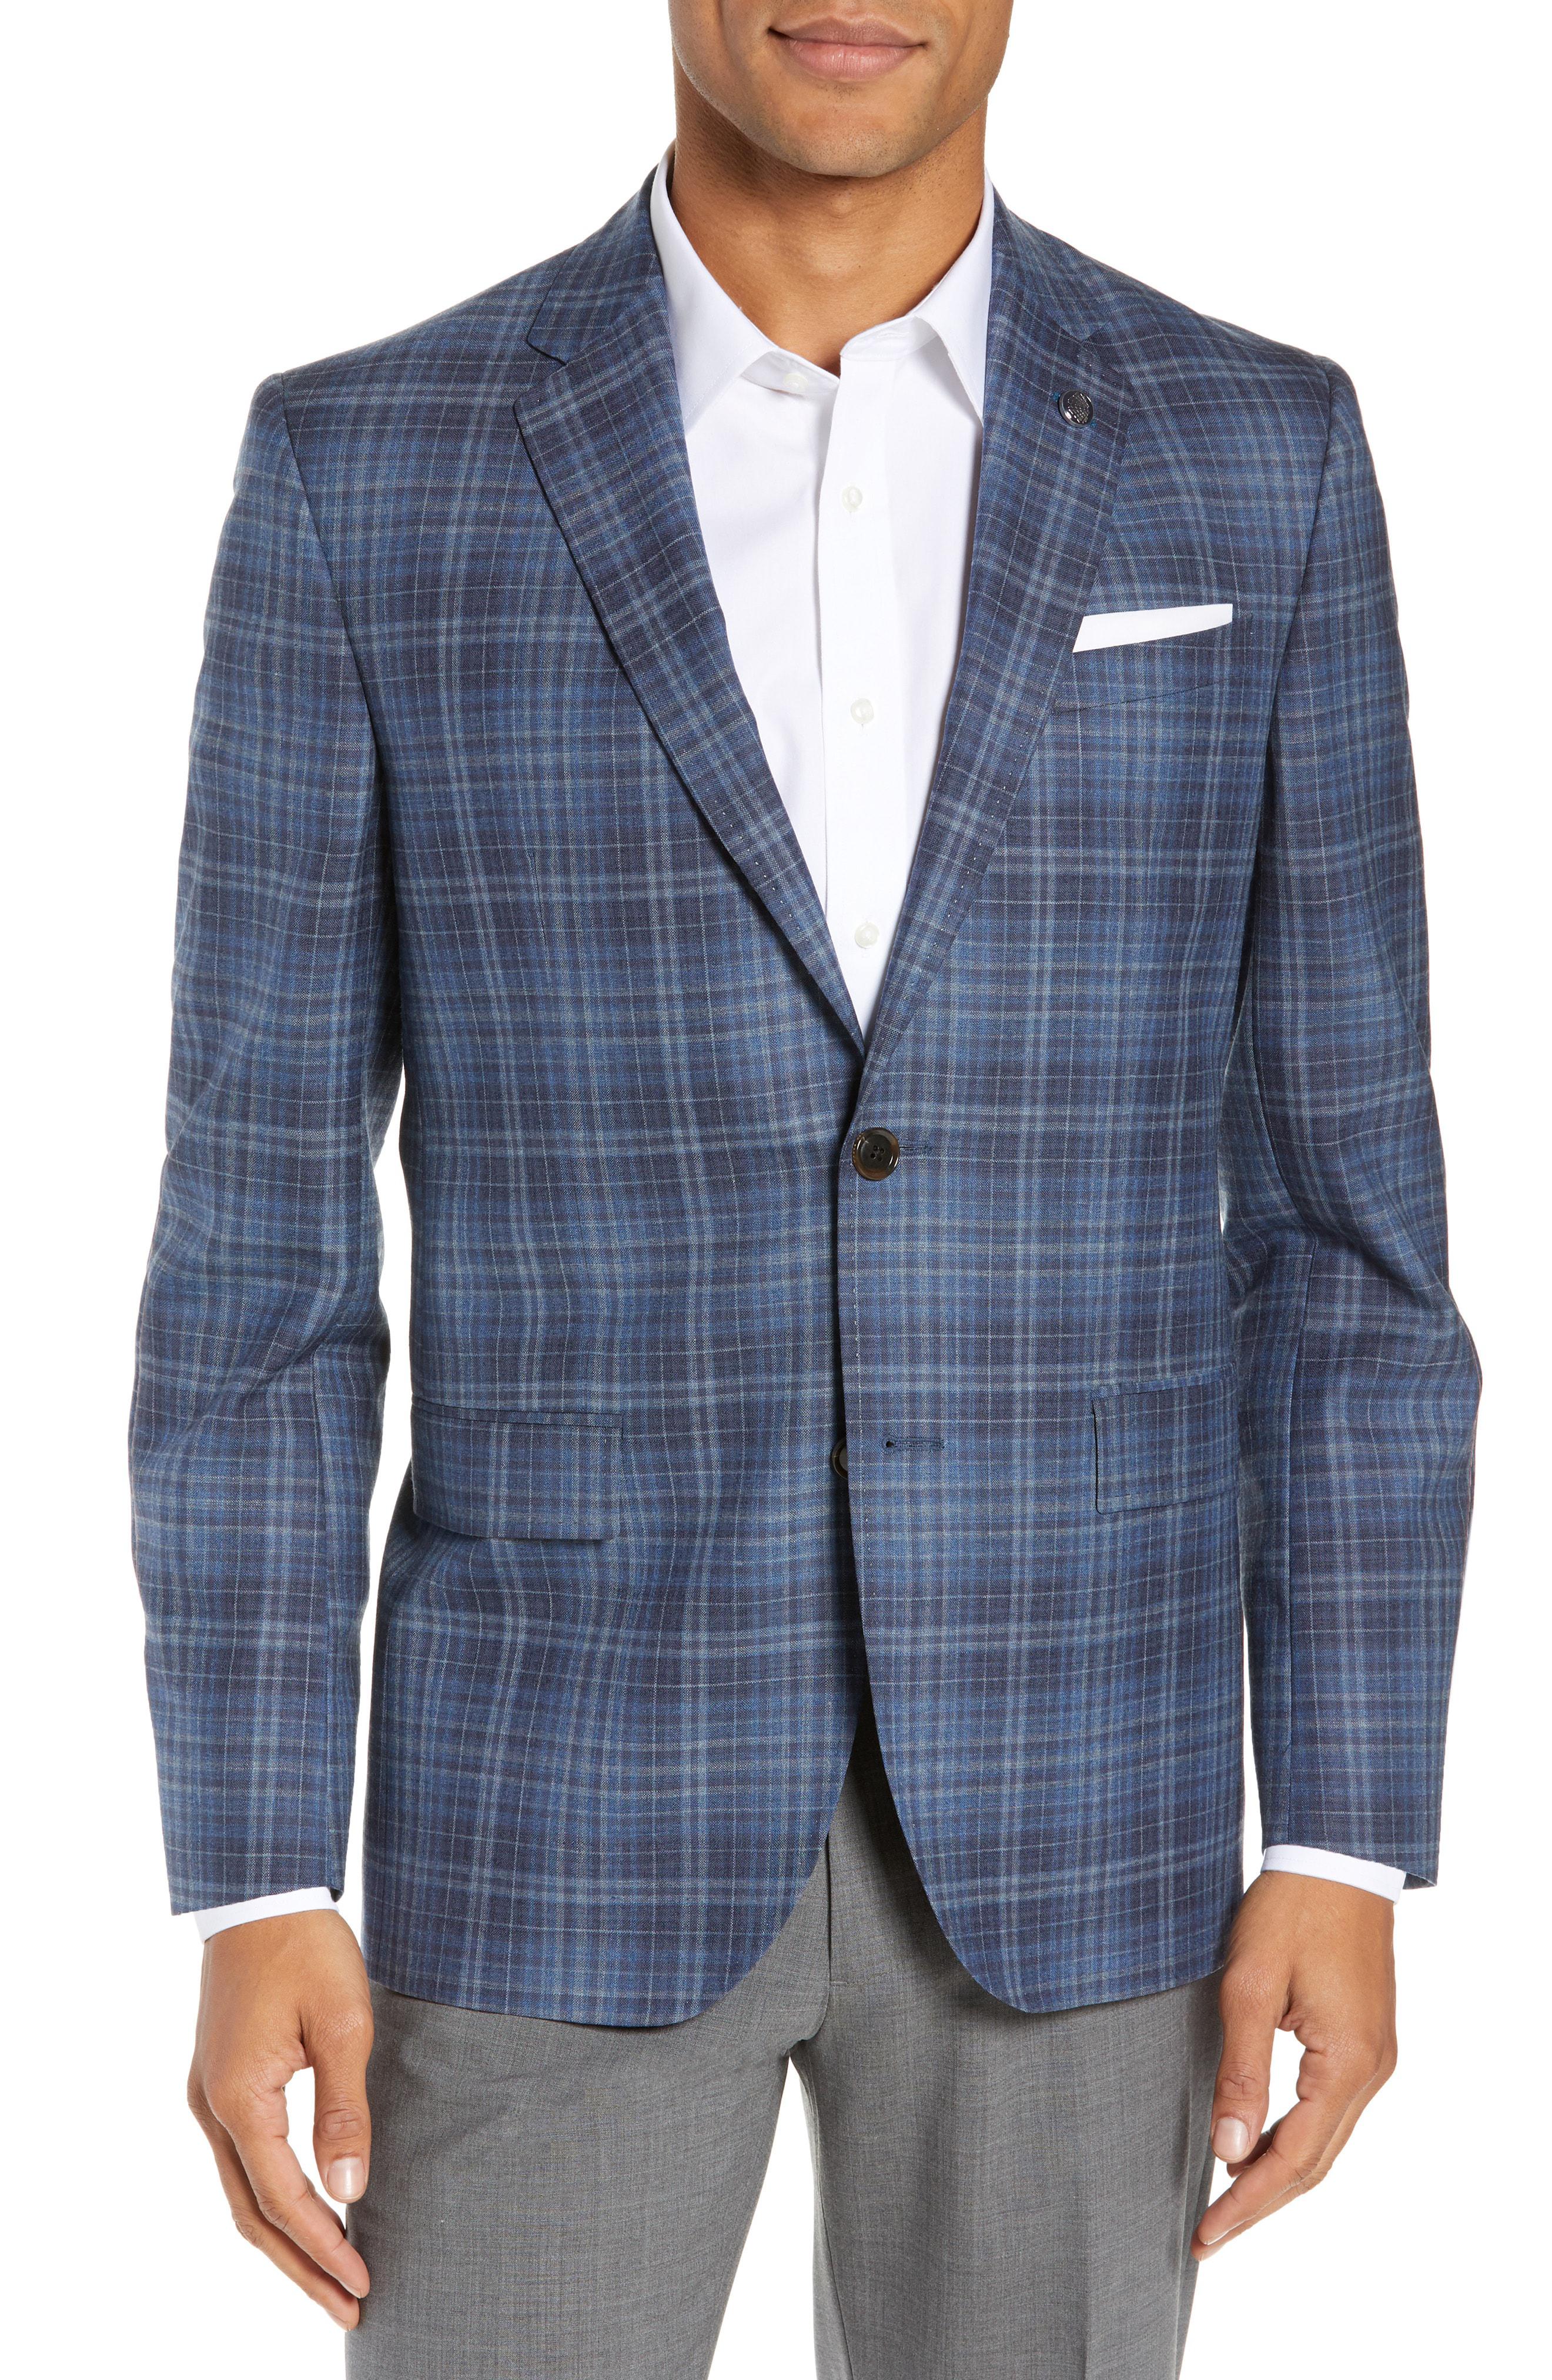 Lyst - Ted Baker Jay Trim Fit Plaid Wool Sport Coat in Gray for Men